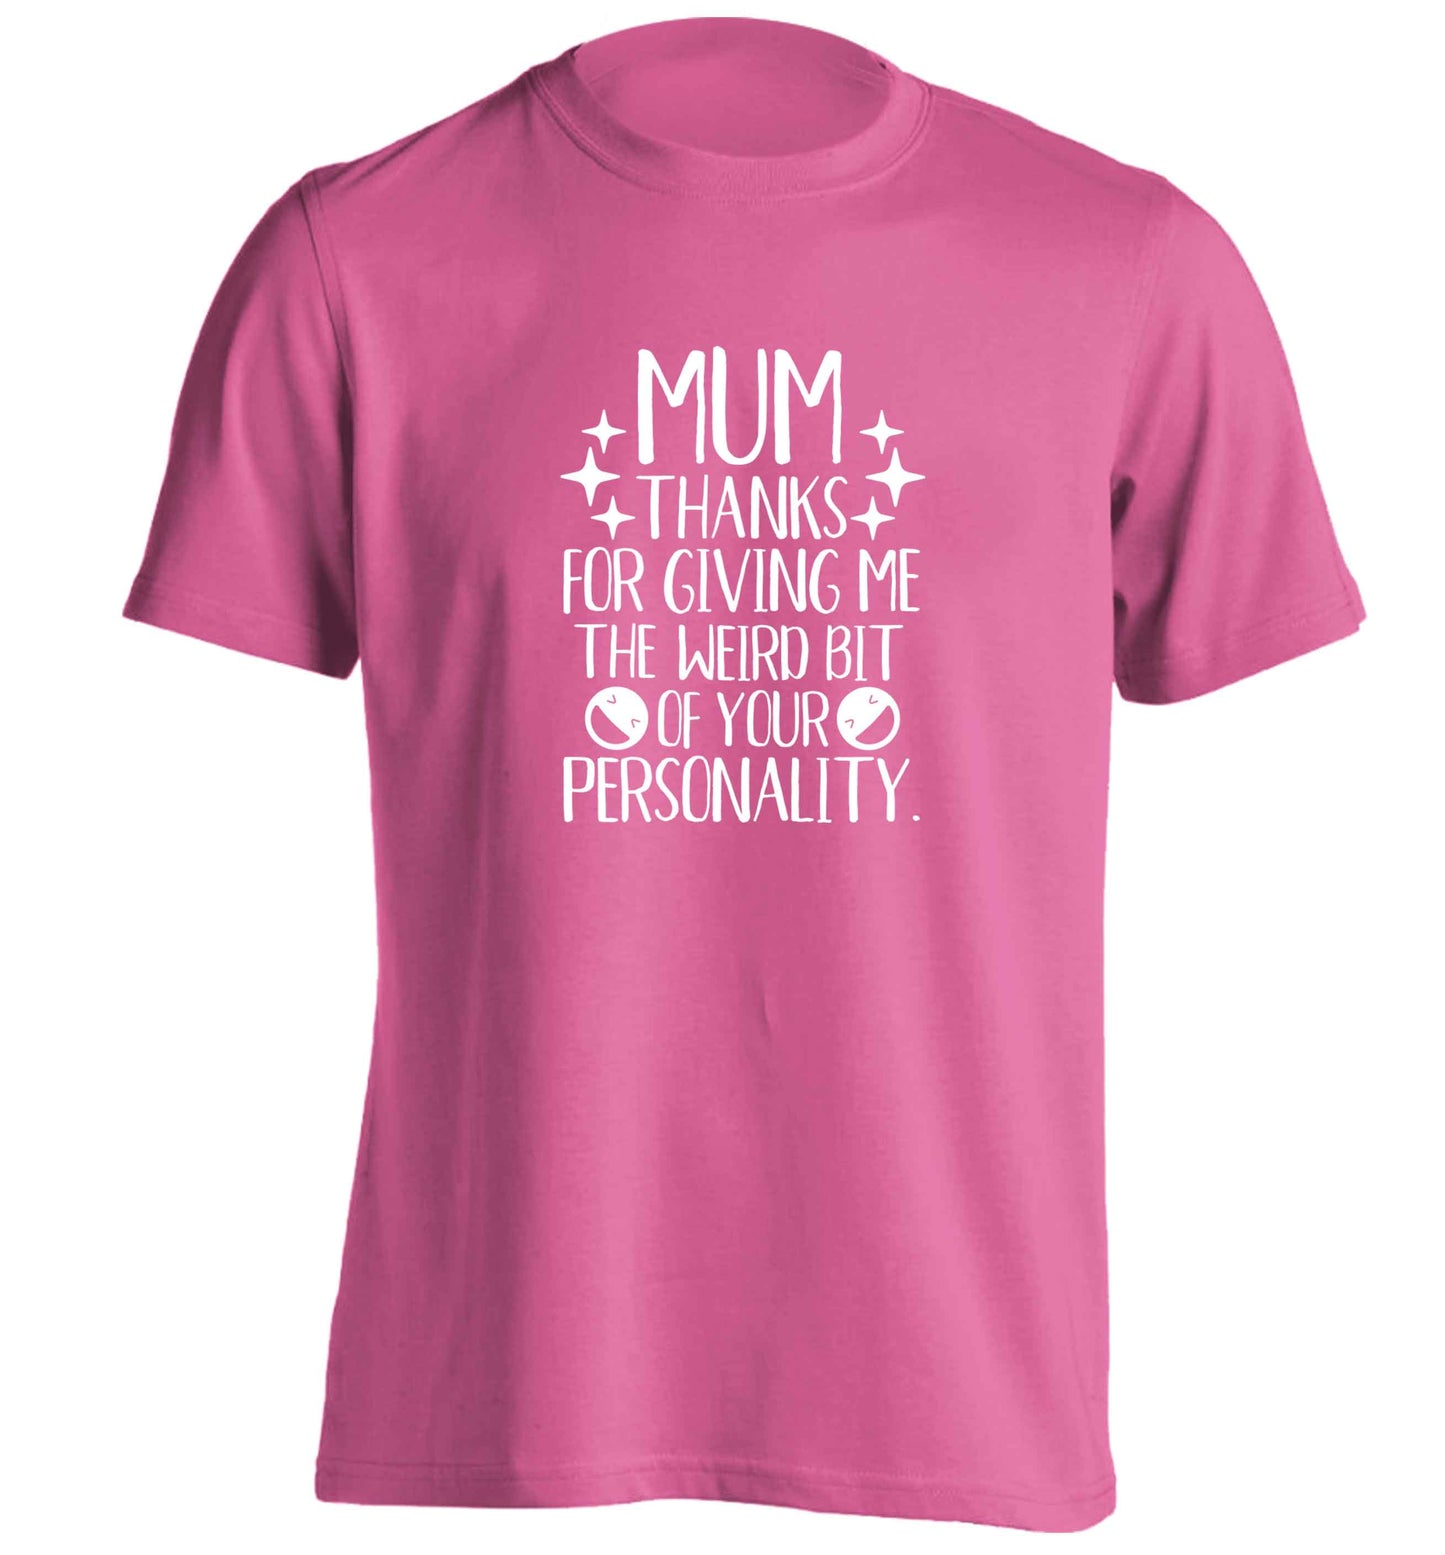 Mum, I love you more than halloumi and if you know me at all you know how deep that is adults unisex pink Tshirt 2XL